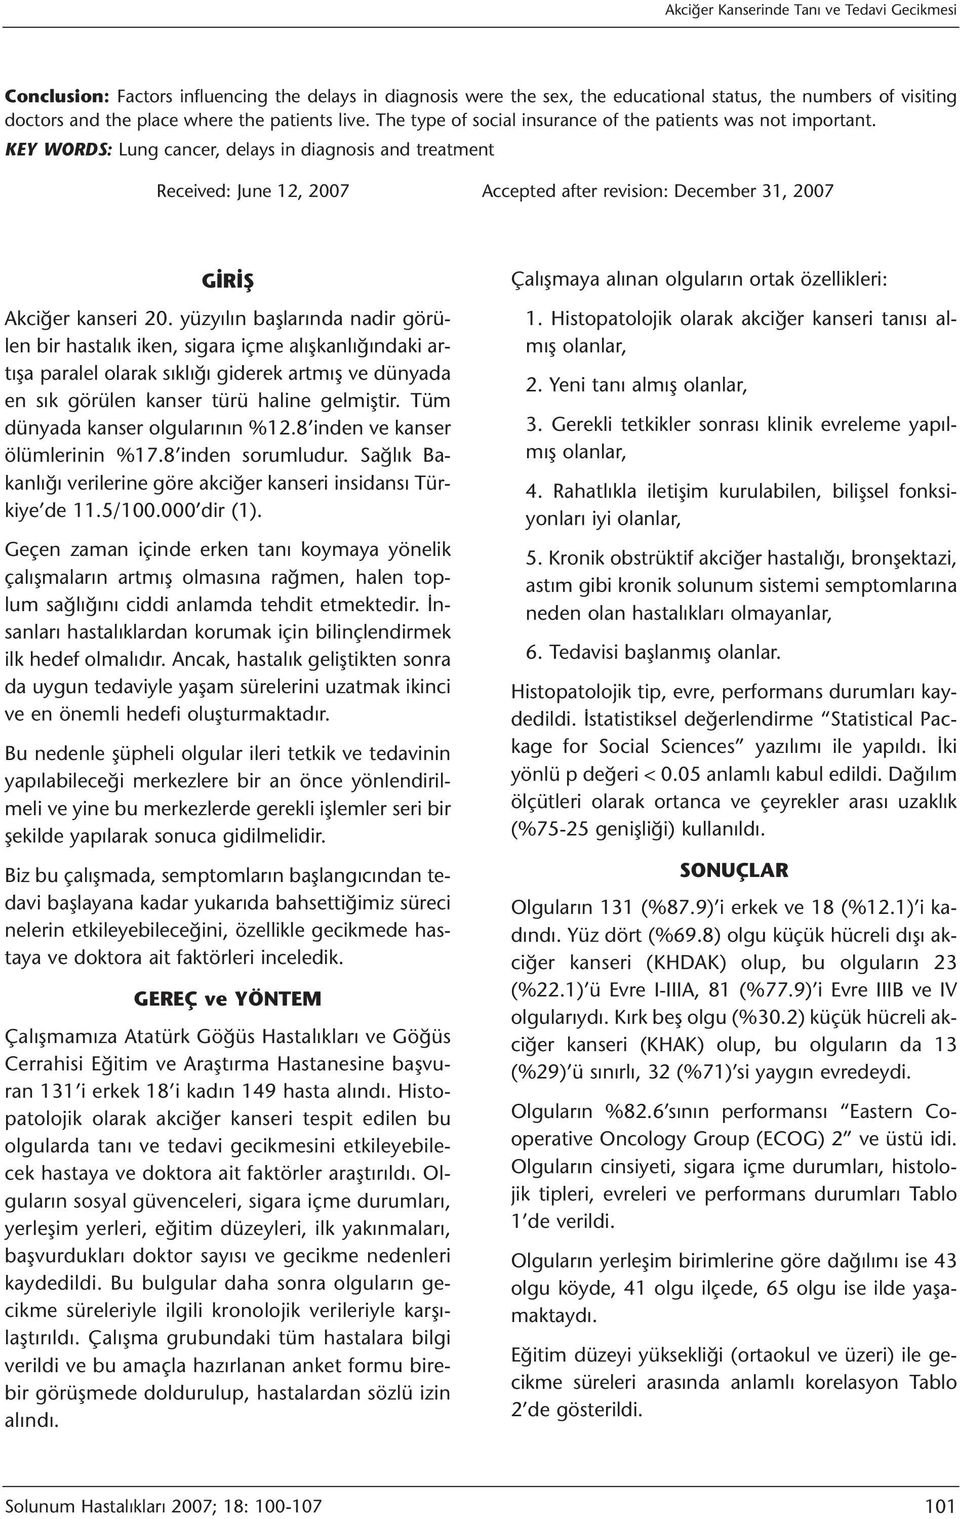 KEY WORDS: Lung cancer, delays in diagnosis and treatment Received: June 12, 2007 Accepted after revision: December 31, 2007 GİRİŞ Akciğer kanseri 20.